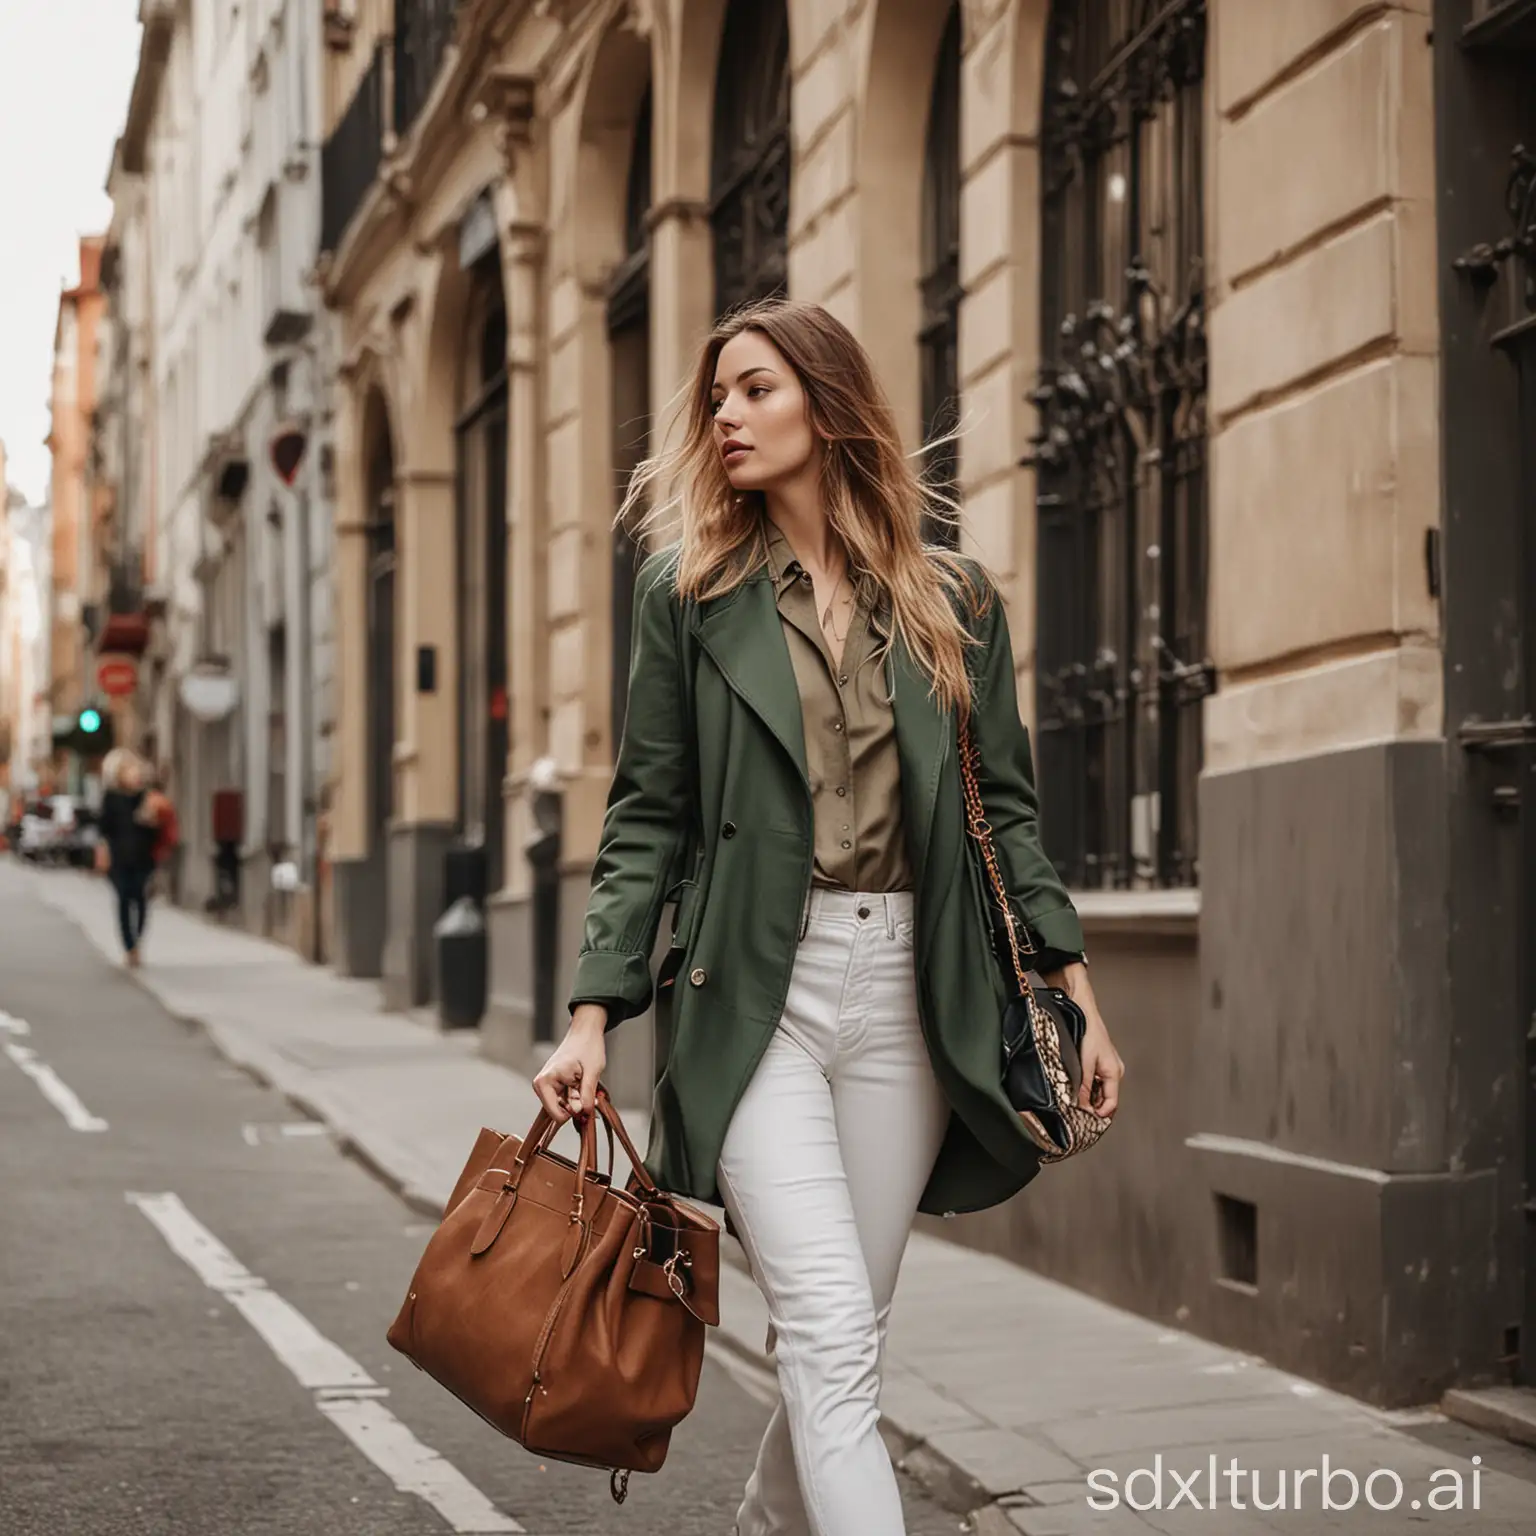 a fashionable European or American woman is walking on the street carrying a designer handbag